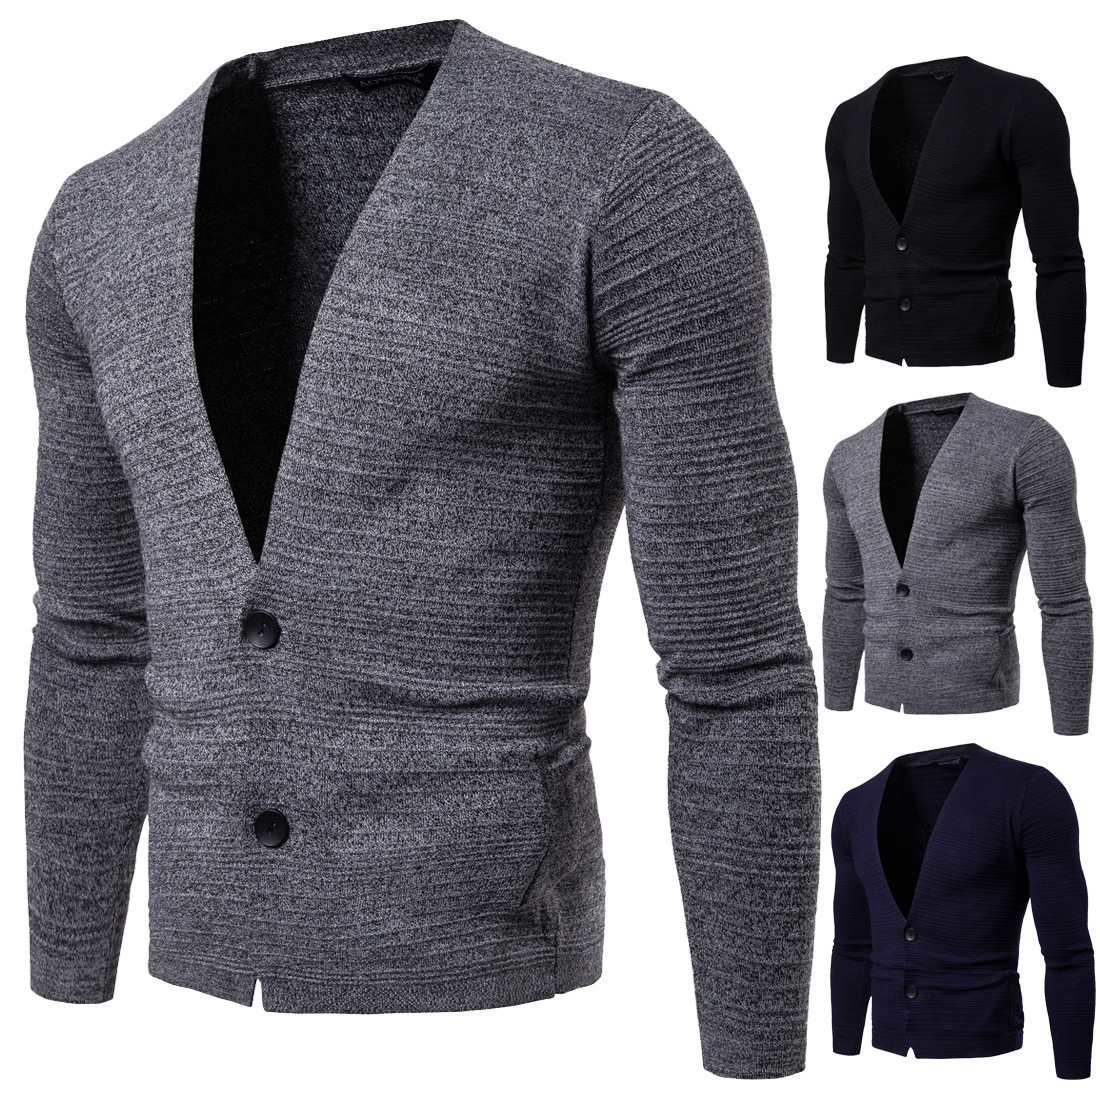 Autumn New Young Men Slim Knit Cardigan Sweater European And American British Style Cardigan Jacket